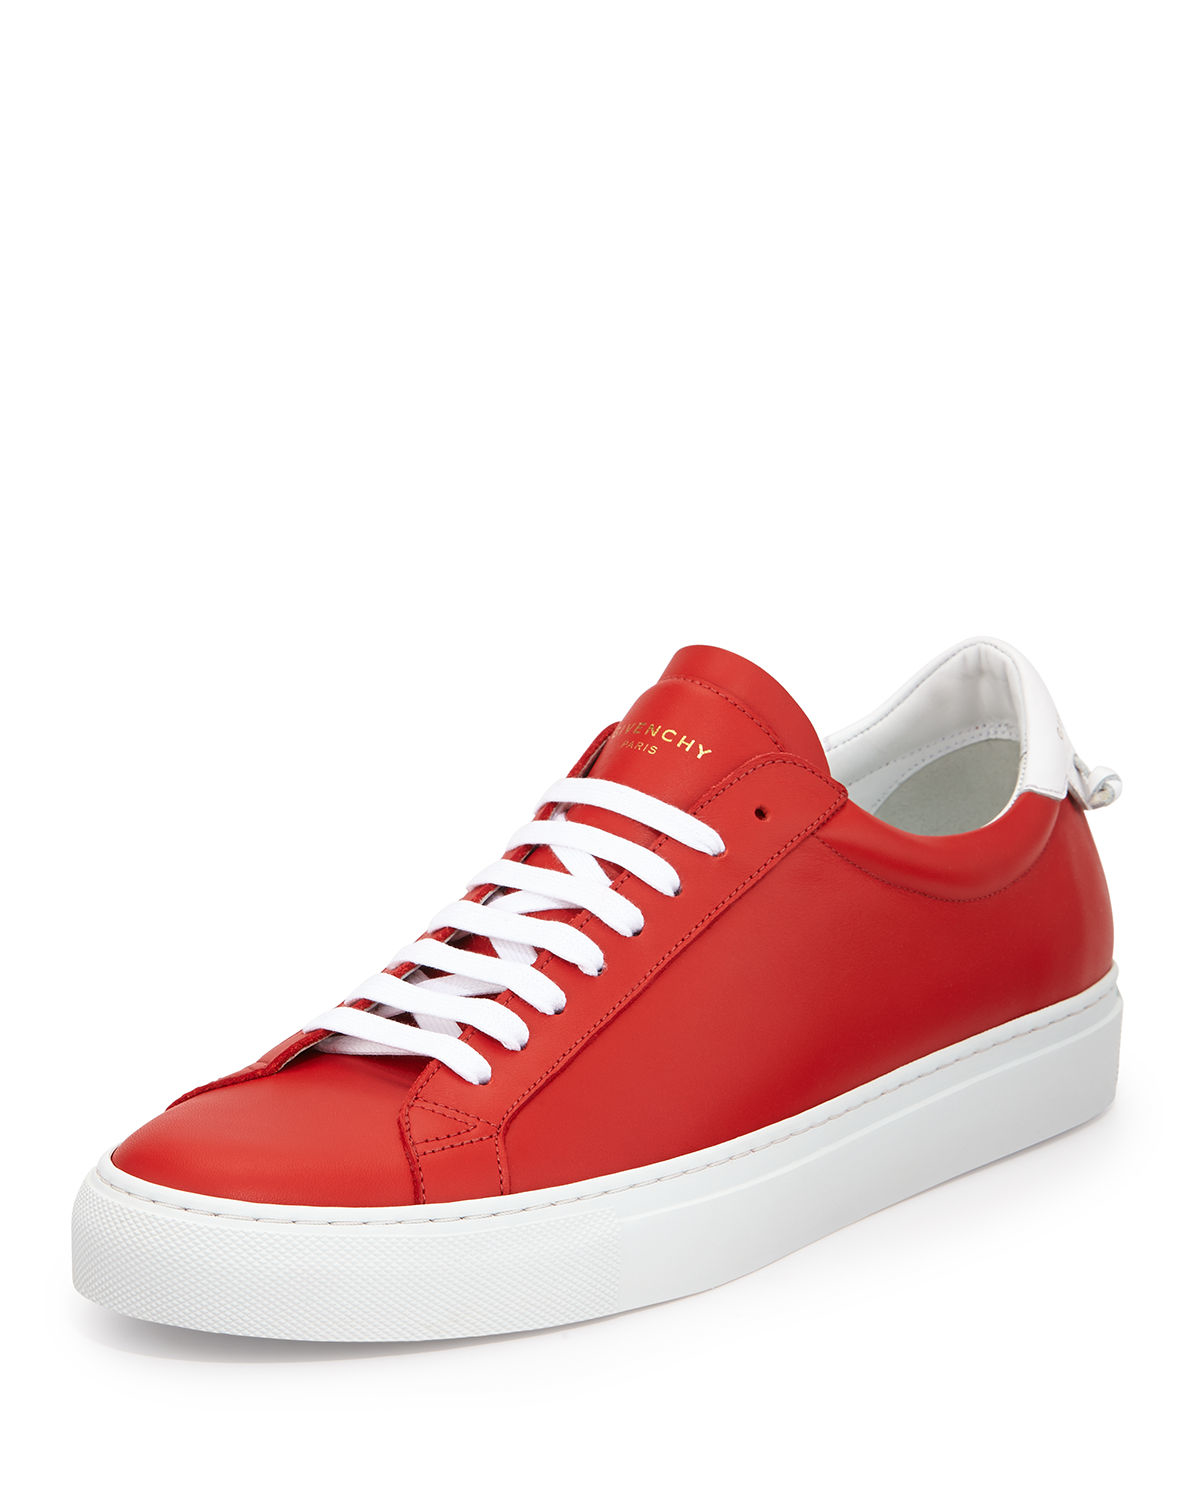 Givenchy Urban Low-top Sneaker in Red for Men | Lyst